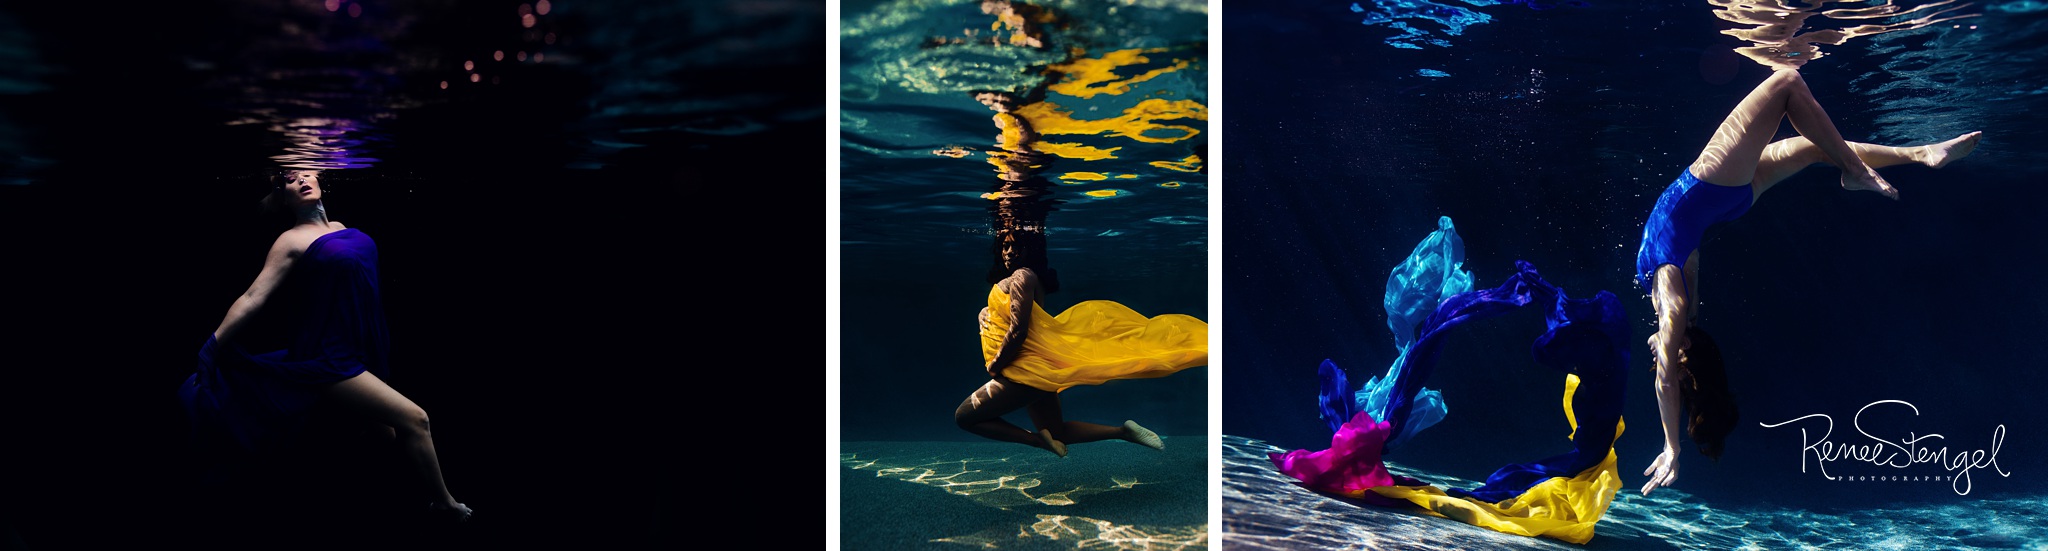 Use of Chiffon Fabric in Underwater Photography from the Studio Closet of Renee Stengel Photography 